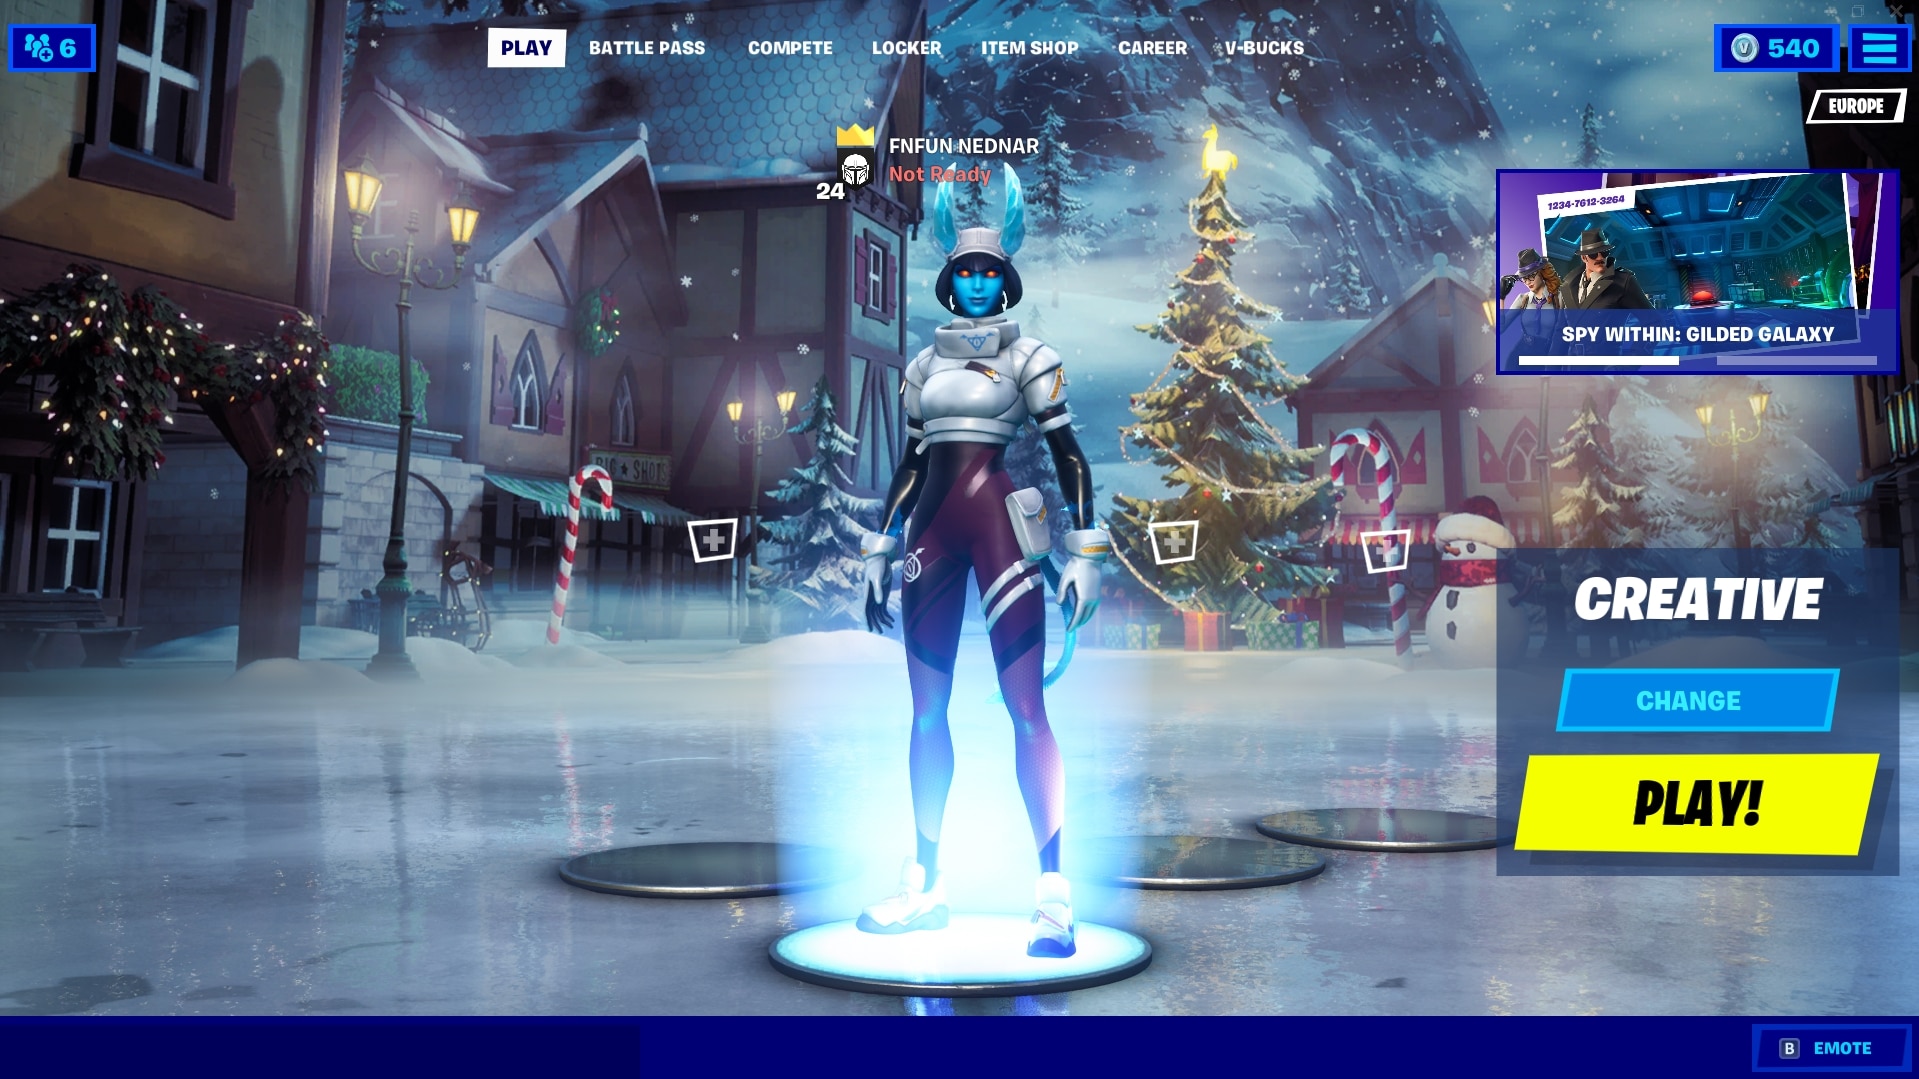 Operation Snowdown (Winterfest 2020) is live with free cosmetics